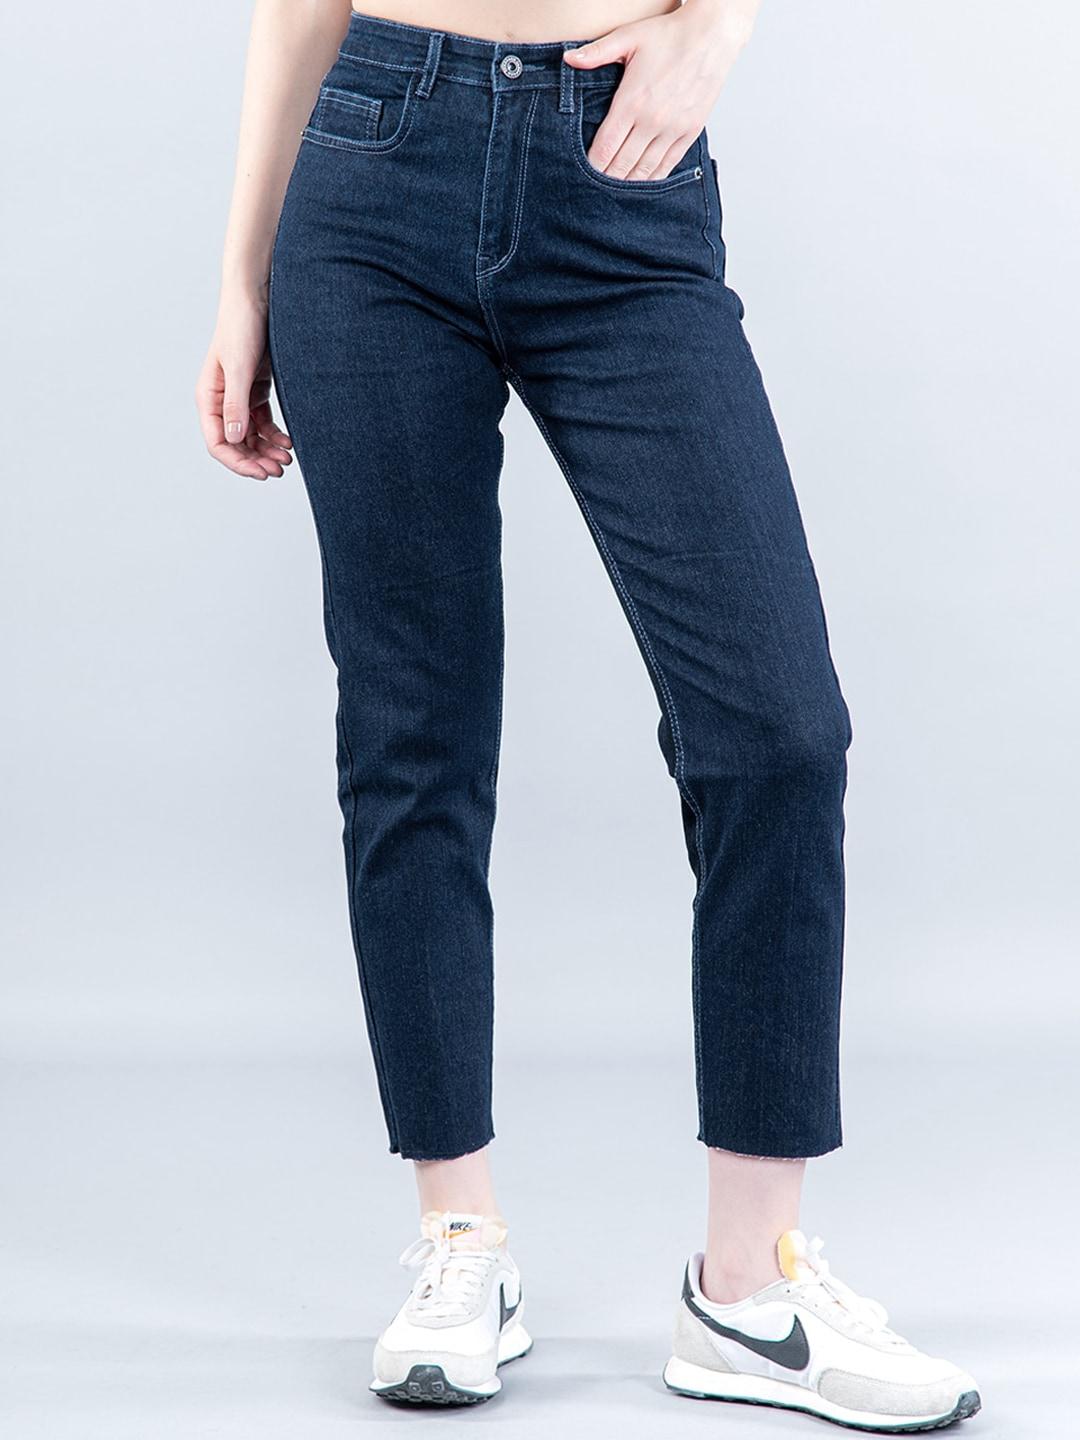 tistabene-women-comfort-mid-rise-clean-look-stretchable-jeans